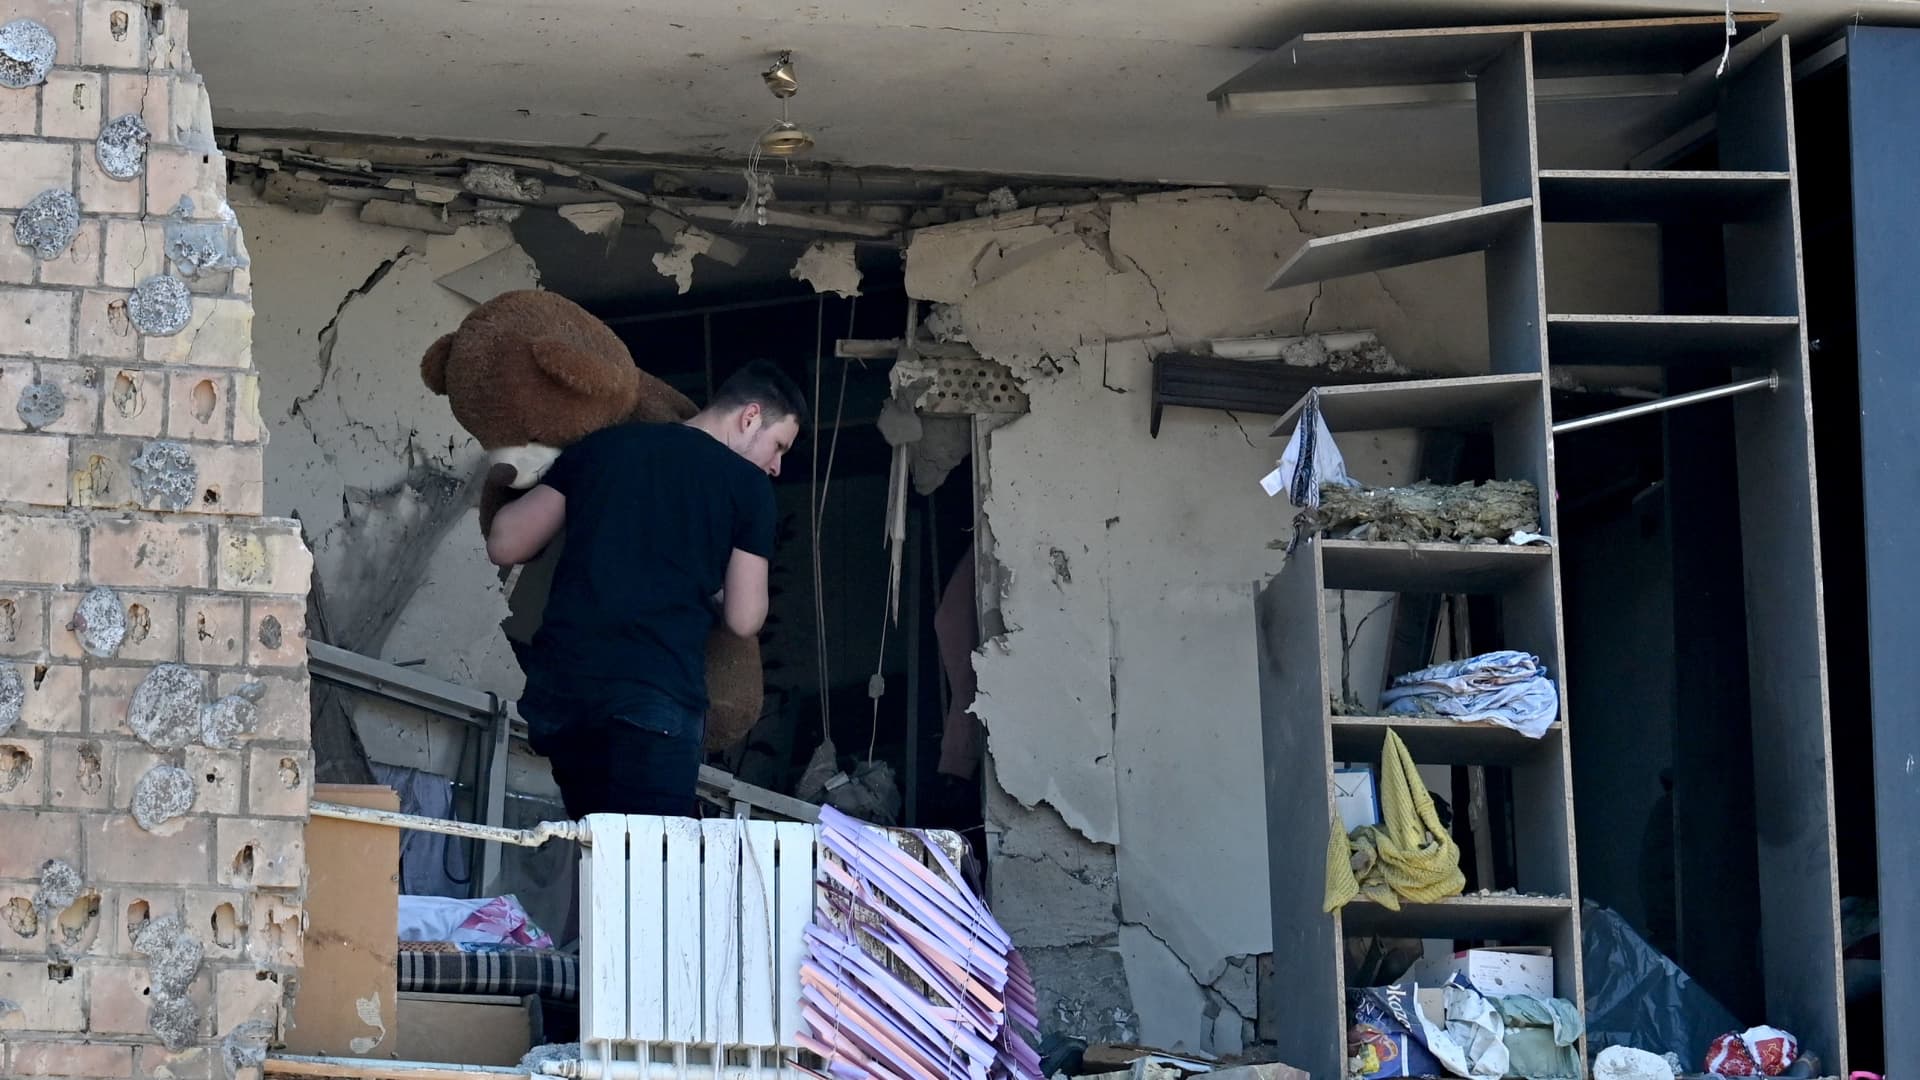 A local resident carries a teddy bear out of his apartment in Kyiv on March 20, 2022 located in a five-storey residential building that partially collapsed after shelling the day before by Russian troops trying to encircle the Ukrainian capital as part of their slow-moving offensives.